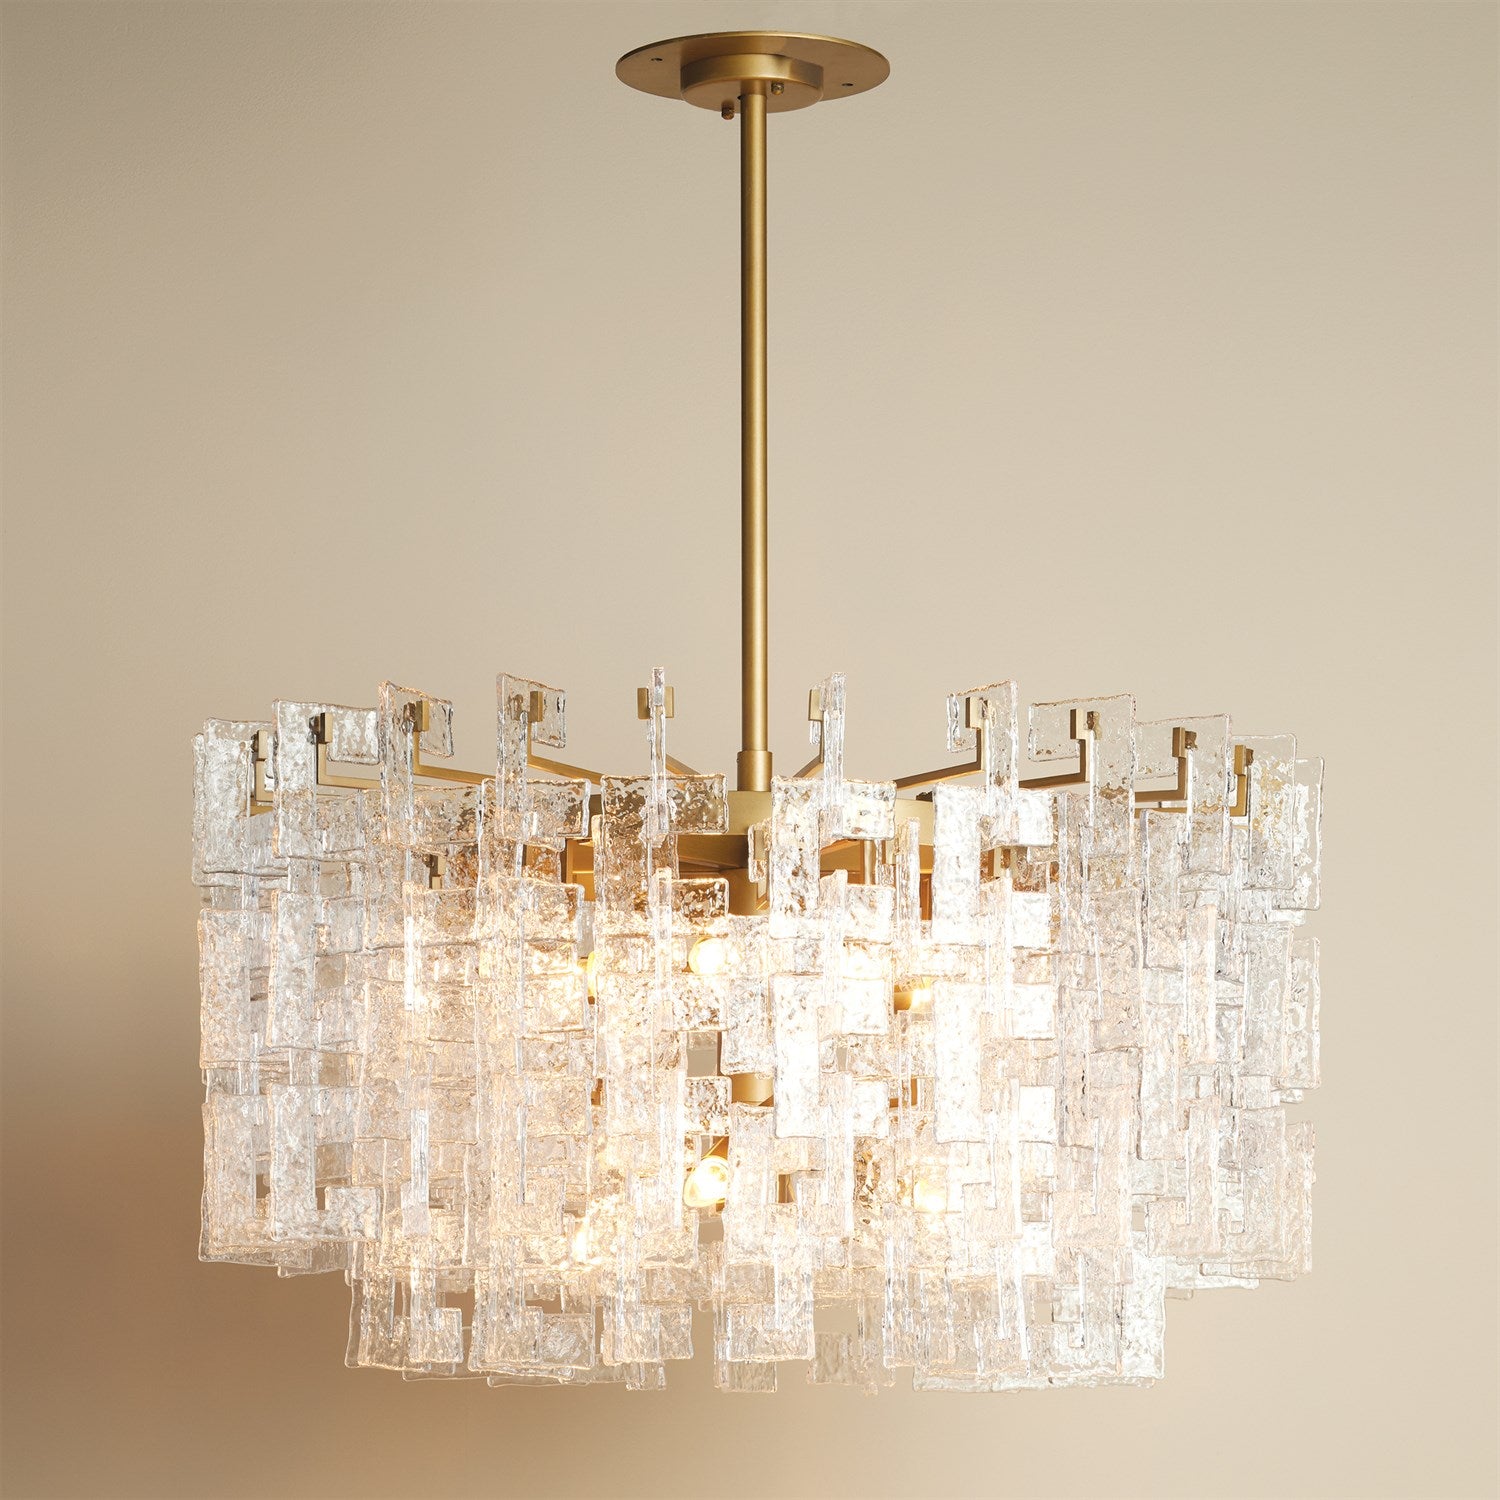 Exposition Chandelier - Brushed Brass Crystal Pendant